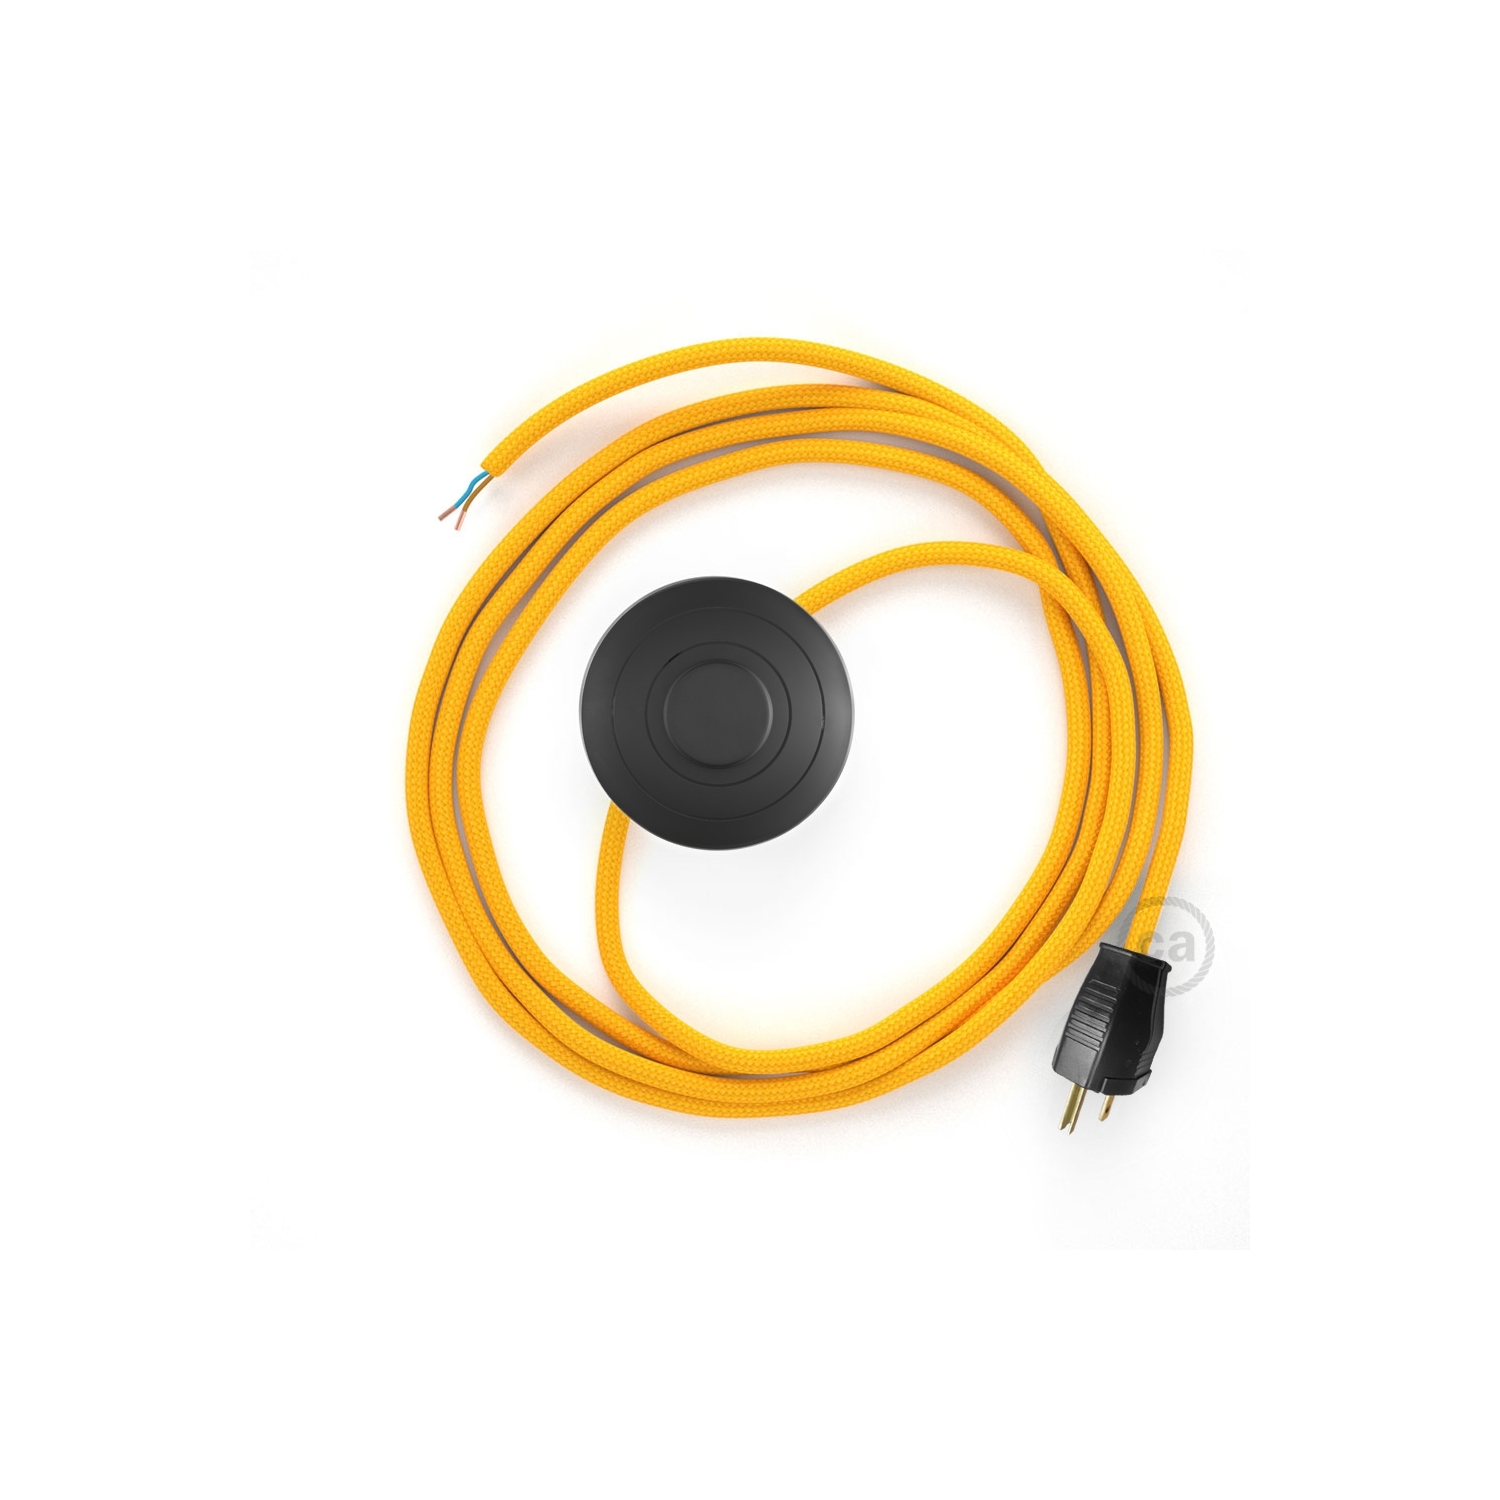 Power Cord with foot switch, RM10 Yellow Rayon - Choose color of switch/plug